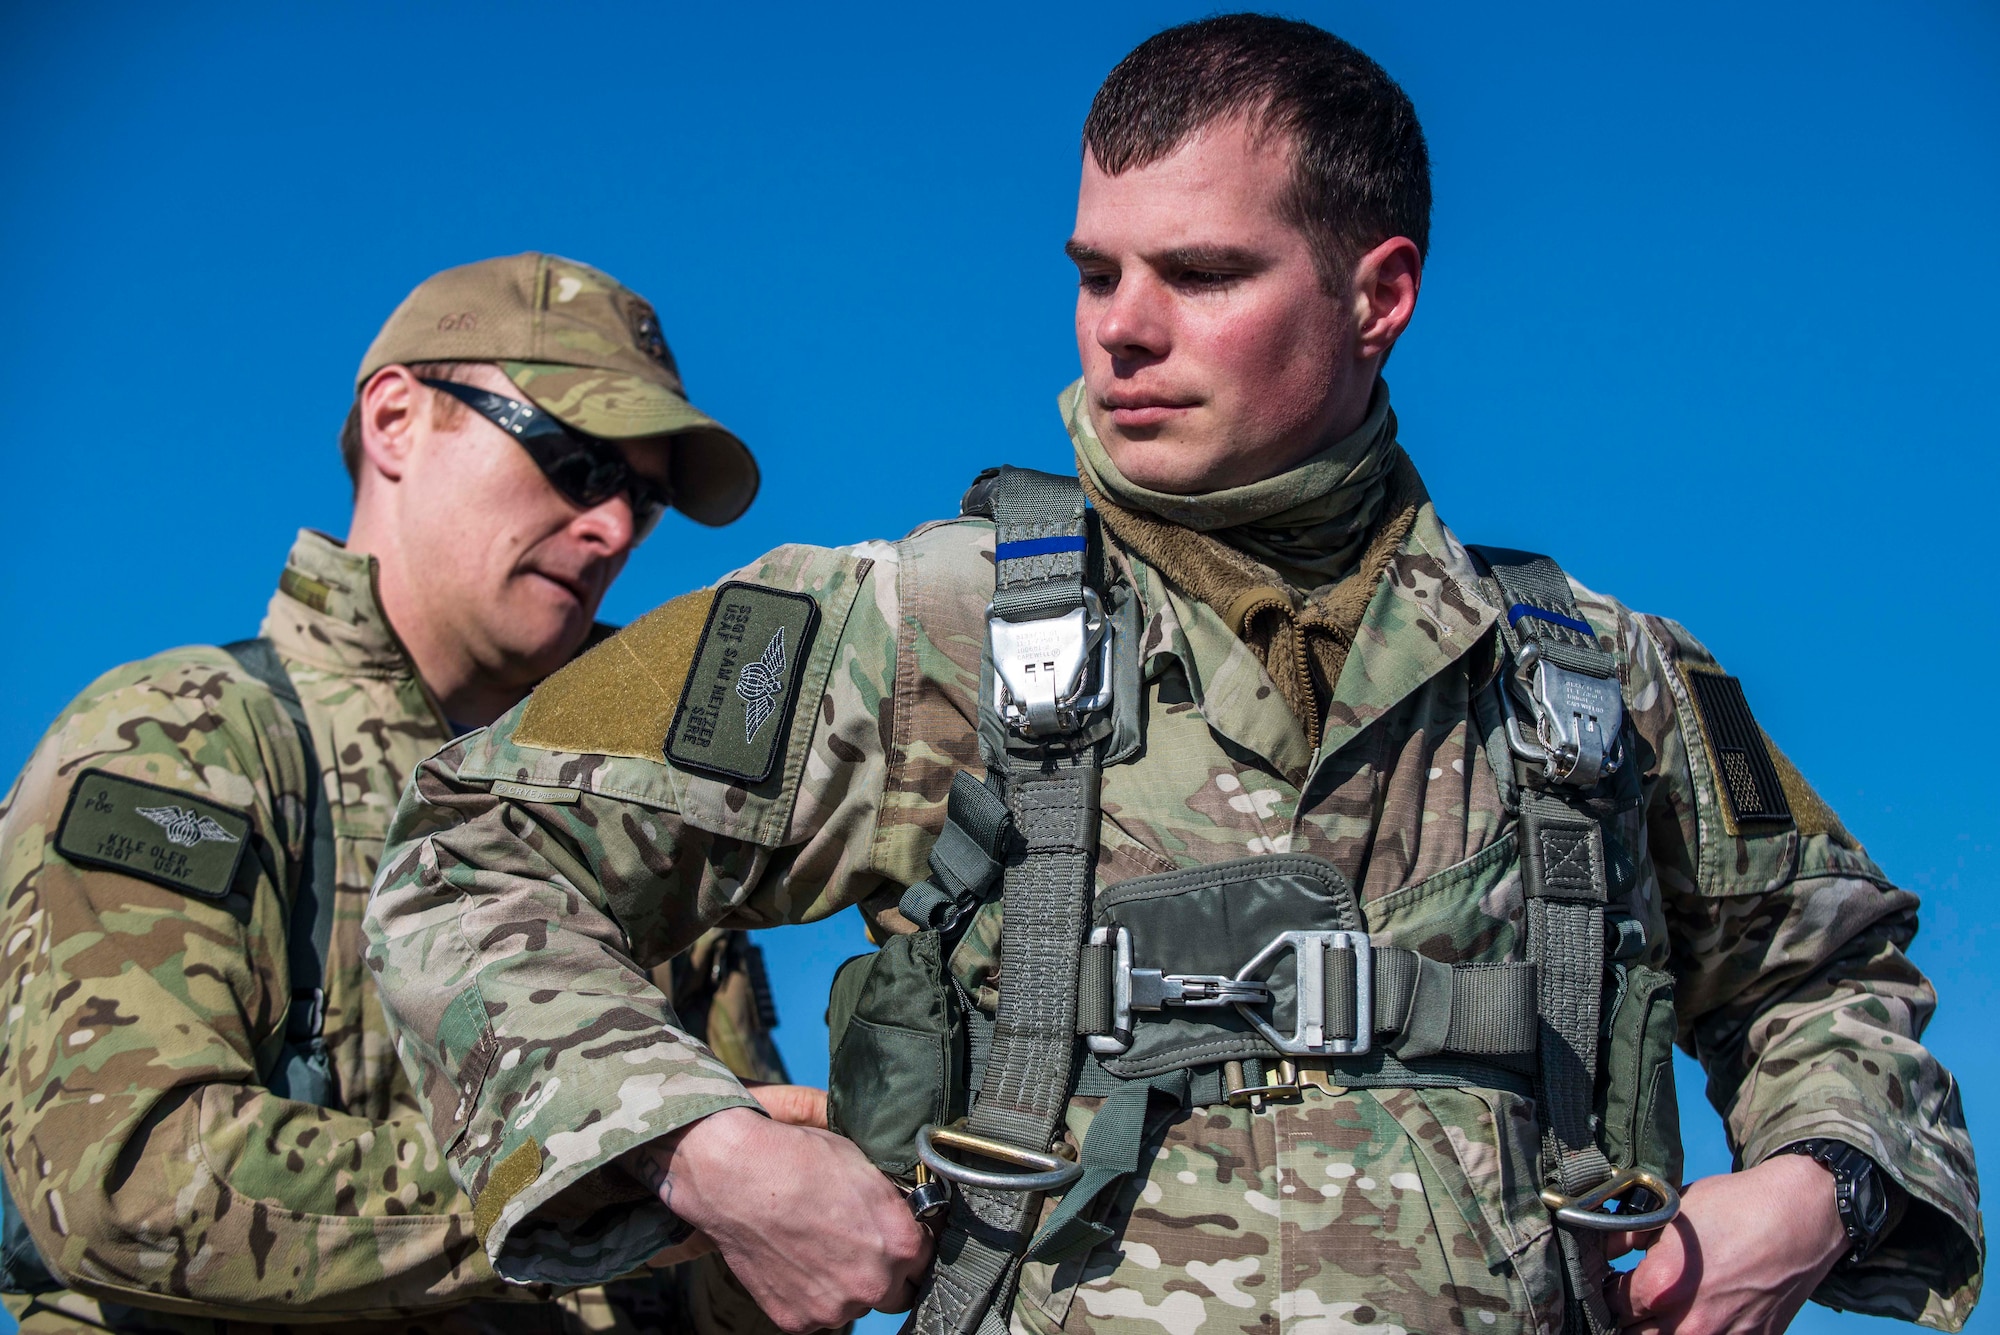 Tech. Sgt. Kyle Oler, 375th Operations Support Squadron's Survival, Evasion, Resistance, and Escape non commissioned officer in charge, helps Staff Sgt. Sam Neitzer, 375th OSS SERE specialist prepare his gear before a static jump on March 2, 2017 at Scott AFB, Illinois. Scott AFB hosted this jump to streamline its capabilities and jump program while offering jumpers an opportunity to get required jumps accomplished as they face weather challenges elsewhere. The 375th OSS created the drop zone to increase the readiness of units in and around Scott AFB and for use by flying or ground units with an interest and the requirements. (U.S. Air Force photos/Senior Airman Tristin English)